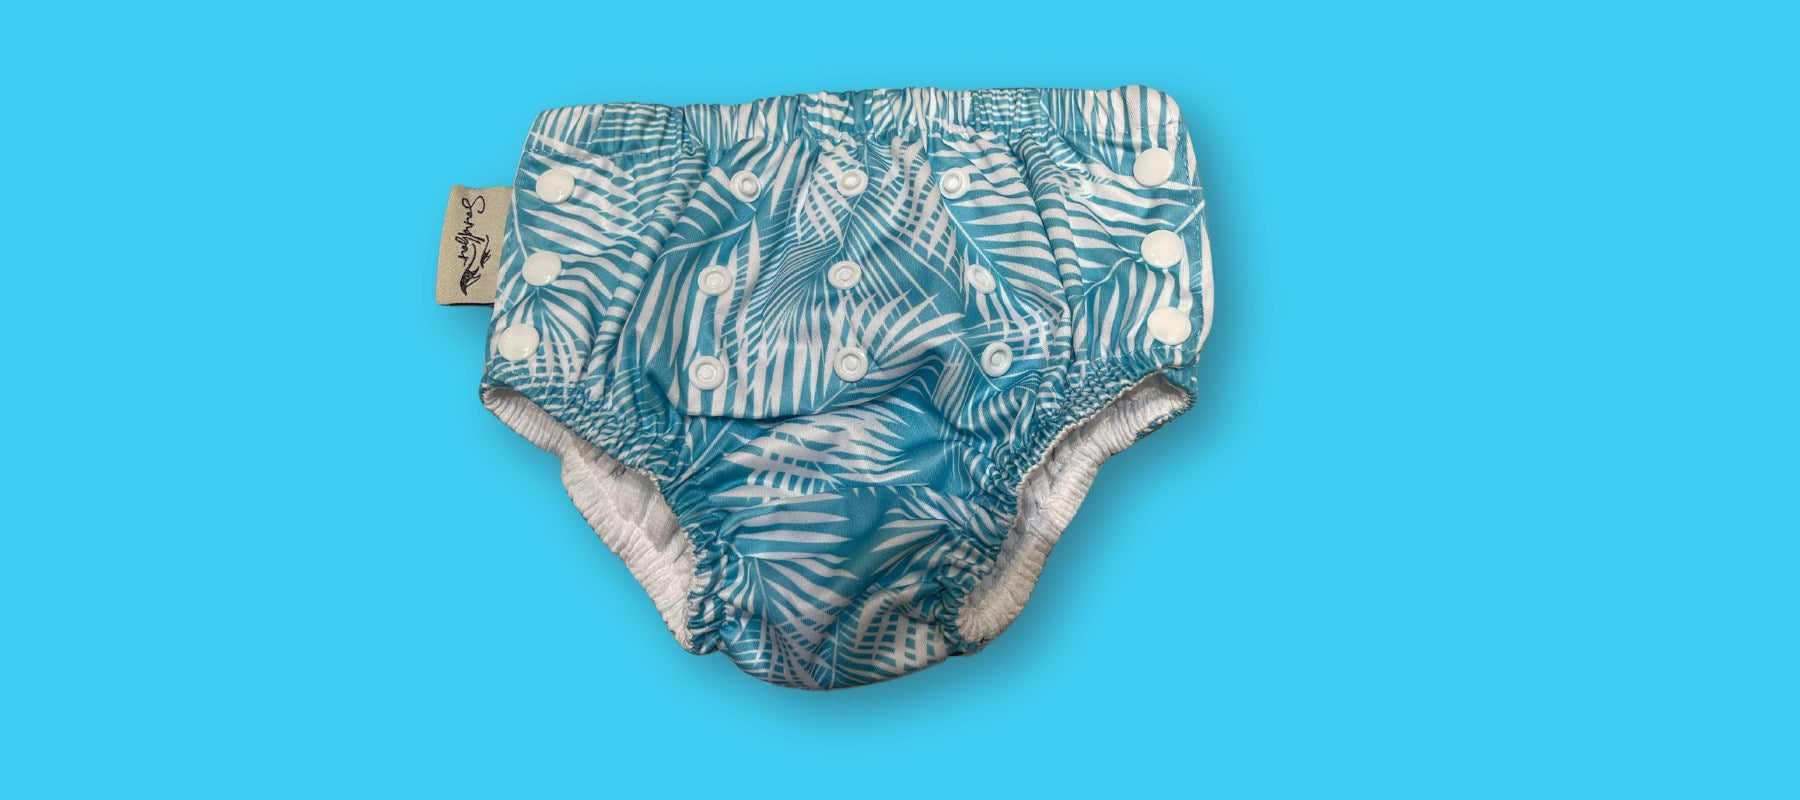 The Sustainable Choice: Reusable Swim Diapers For Eco-conscious Families